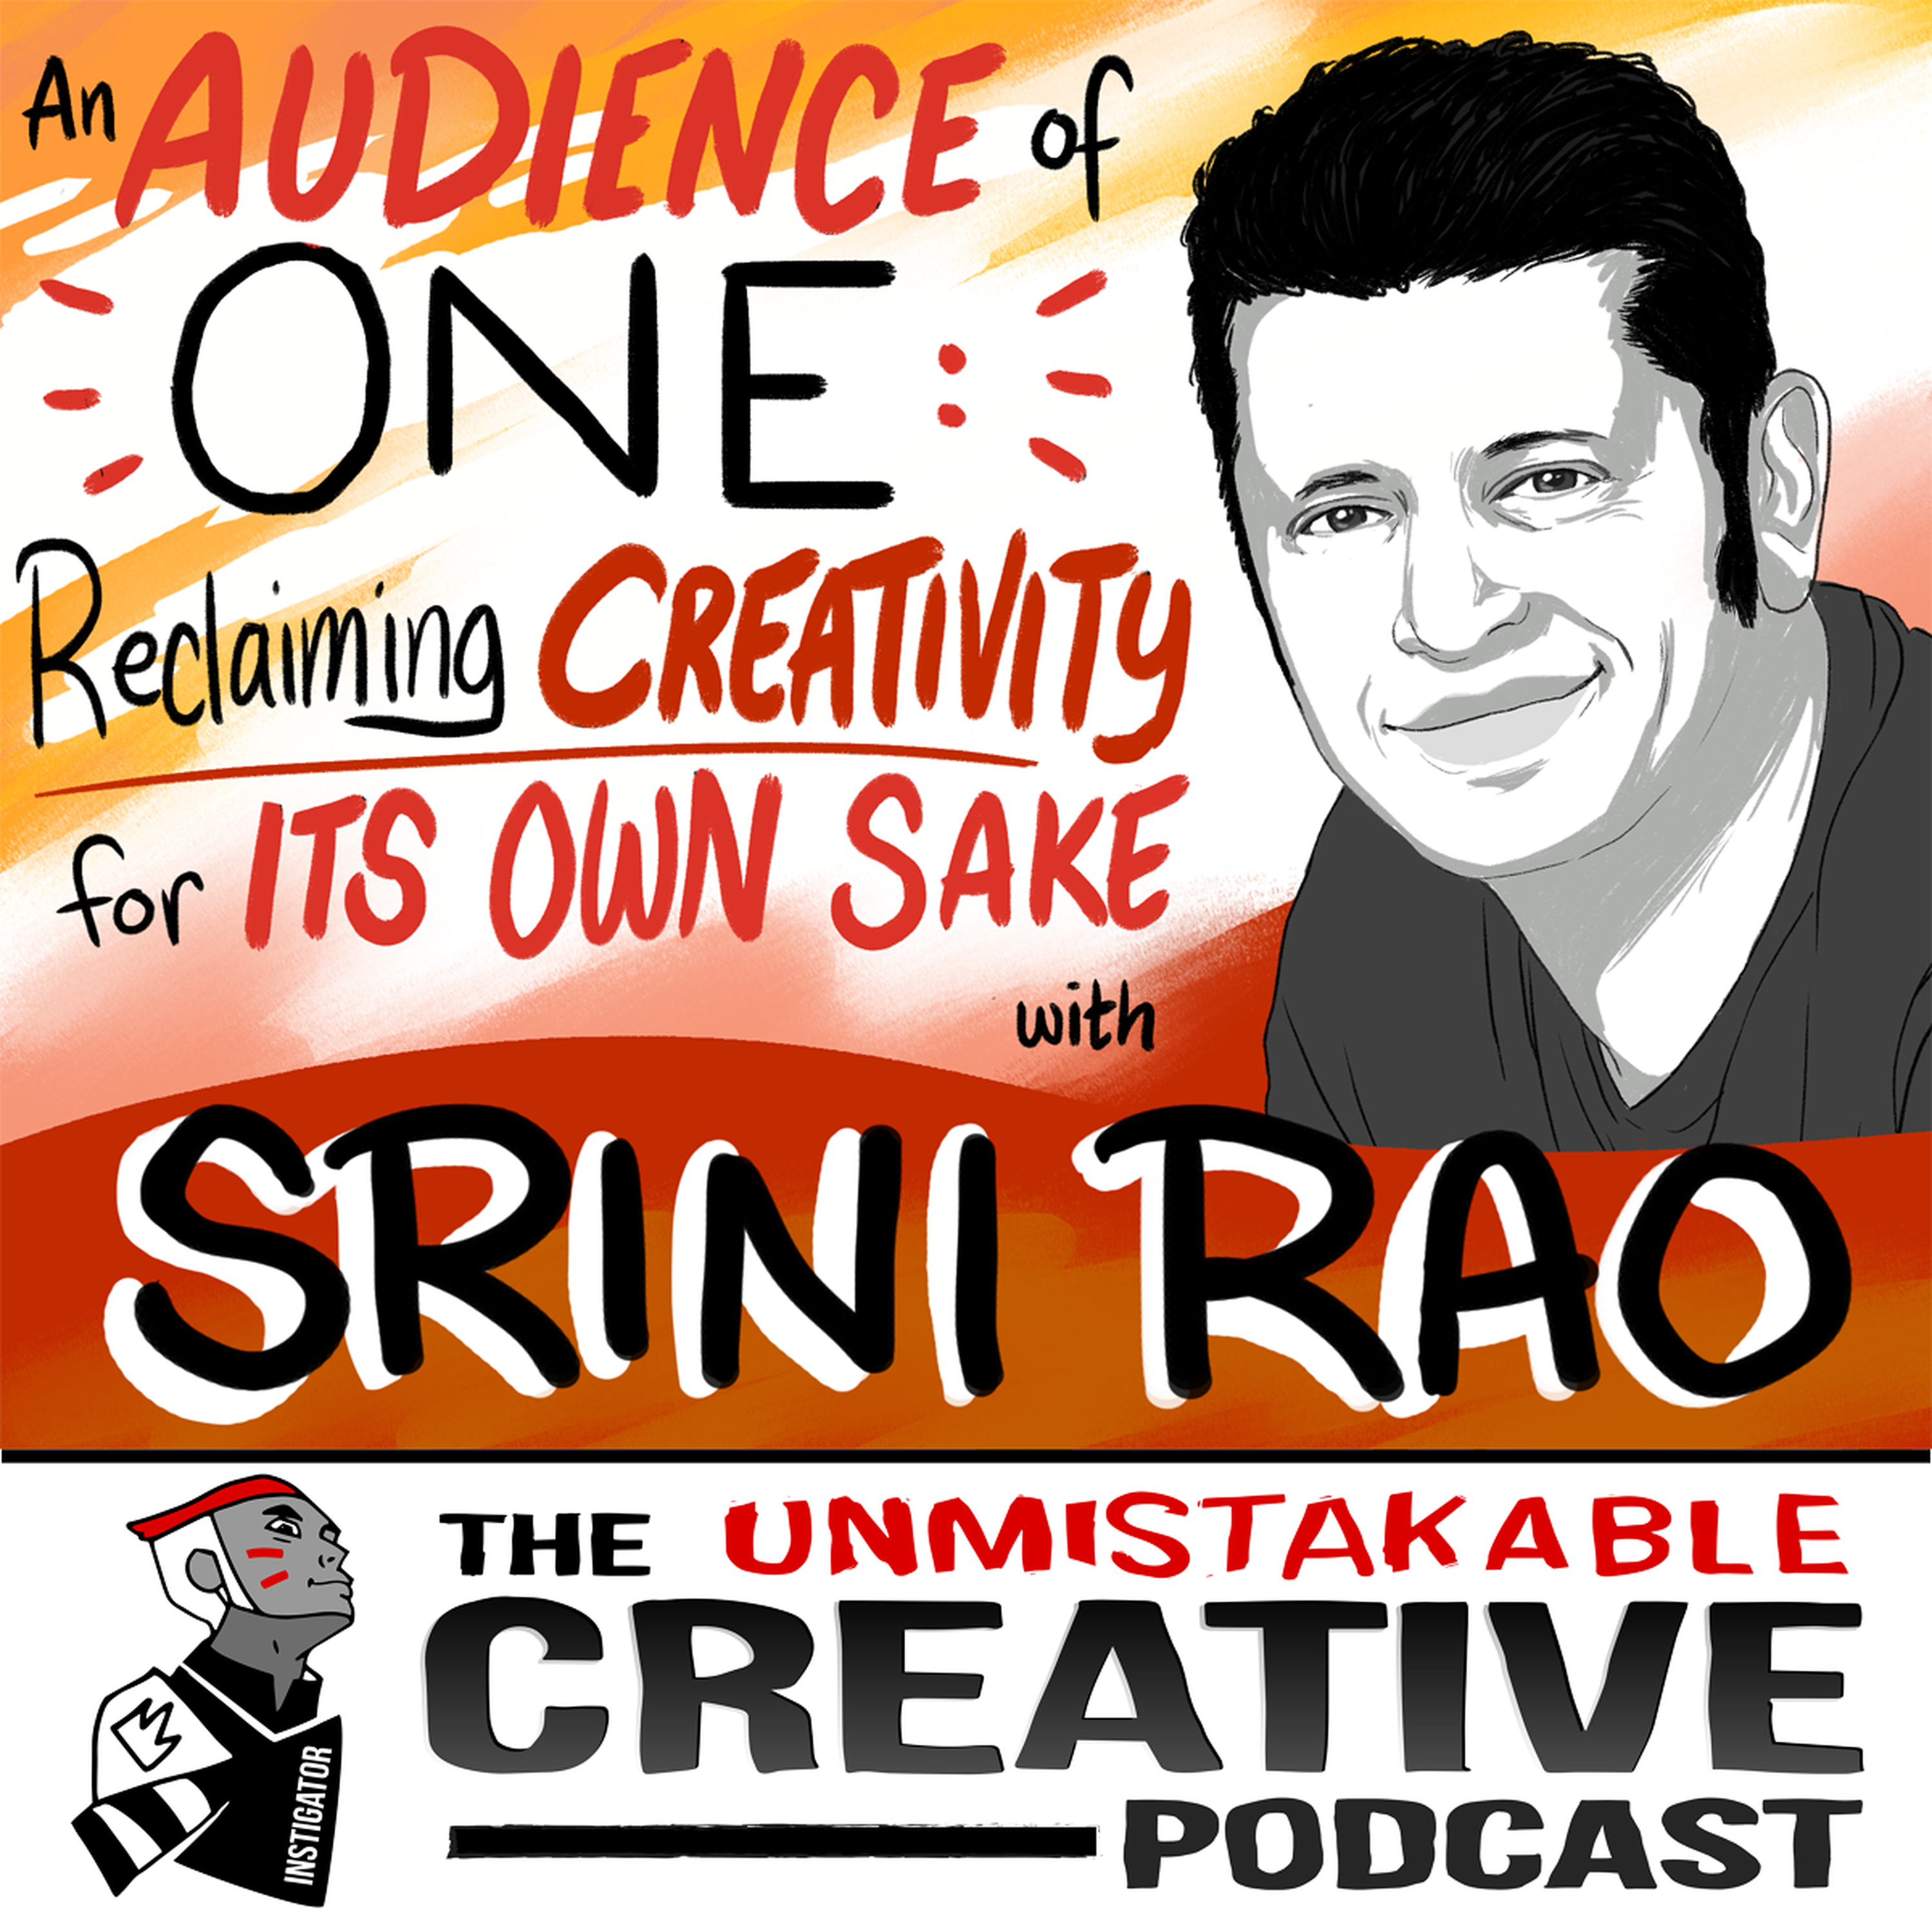 Best of: An Audience of One: Reclaiming Creativity for Its Own Sake with Srini Rao